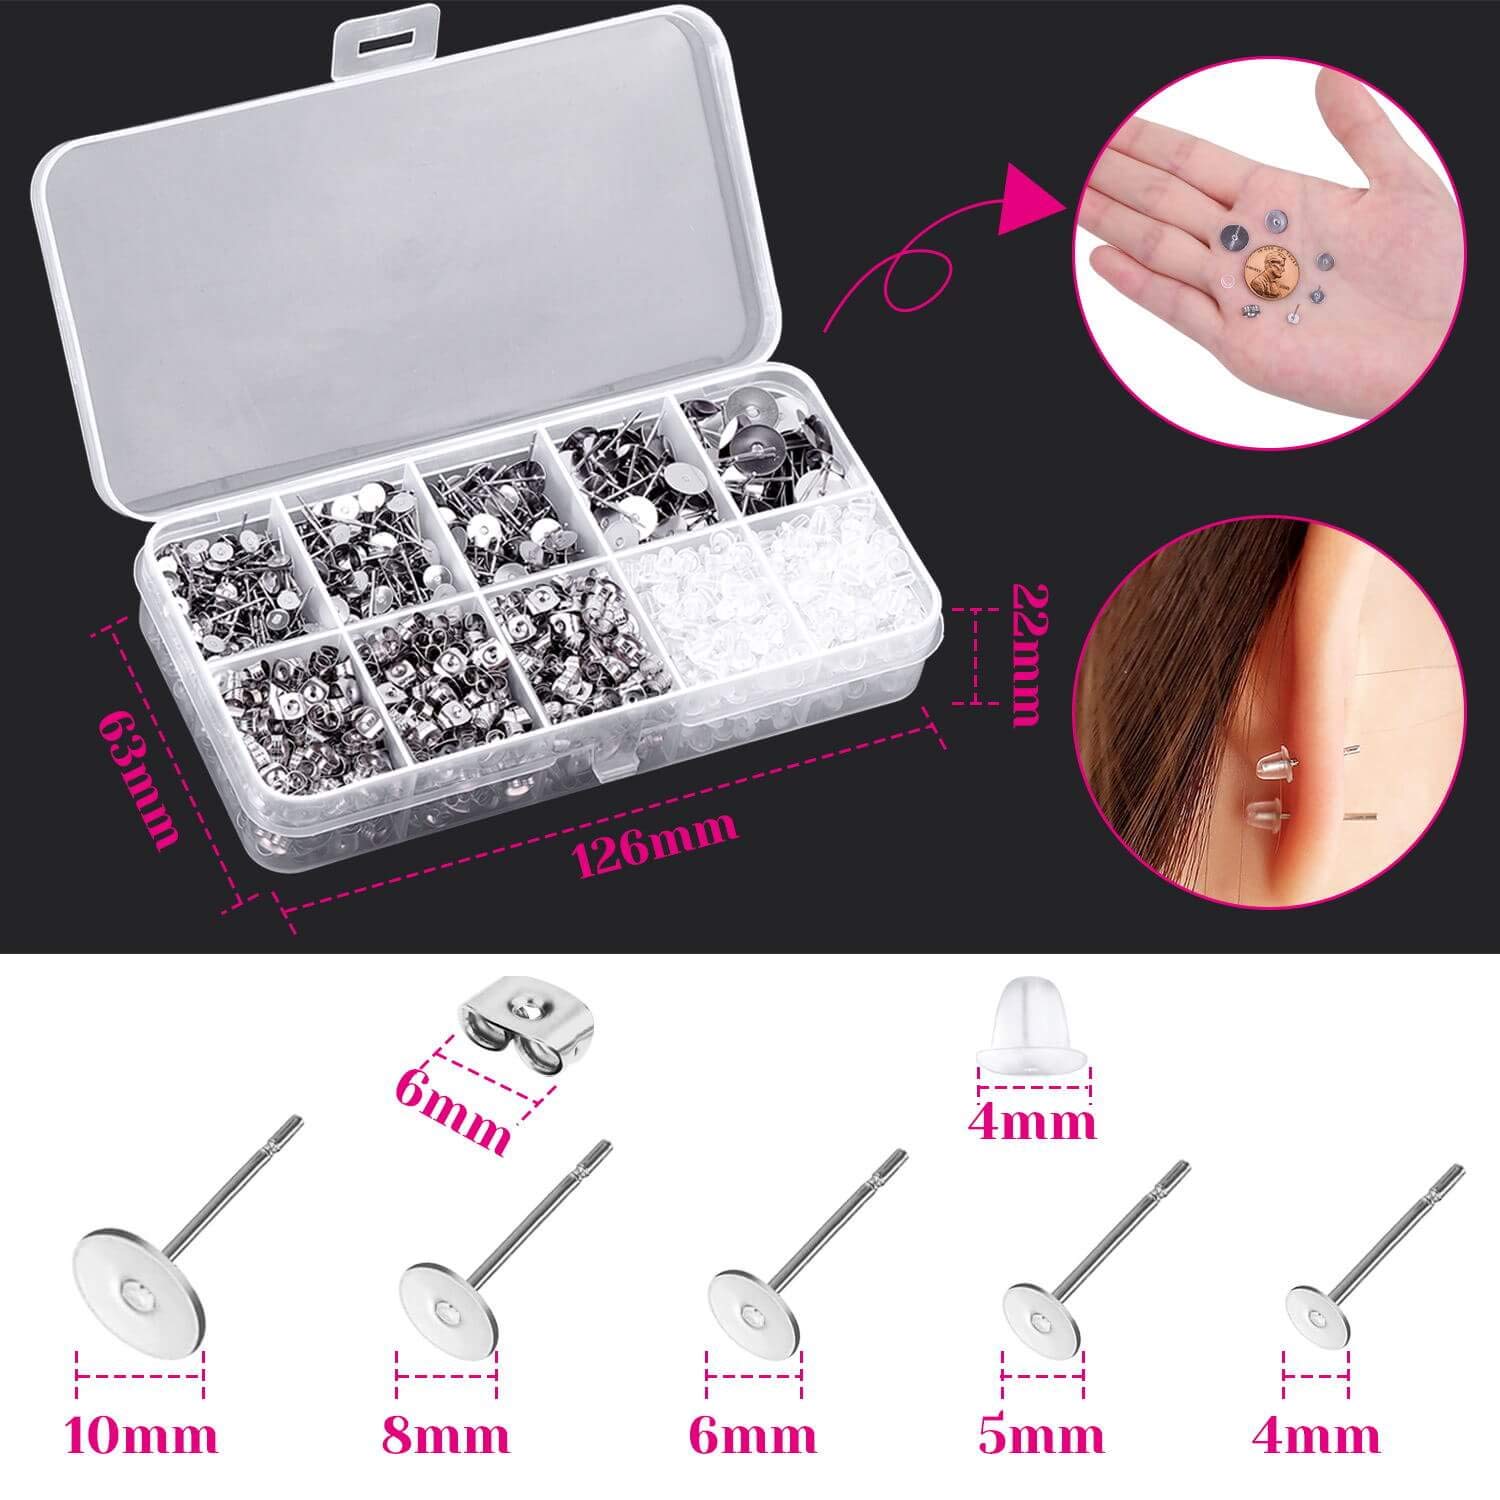 Earring Posts and Backs, Shynek 1800pcs Earring Making Supplies with Stainless Steel Earring Posts and Earring Backs for Studs, Earring Making Kit for DIY Earrings and Jewelry Making